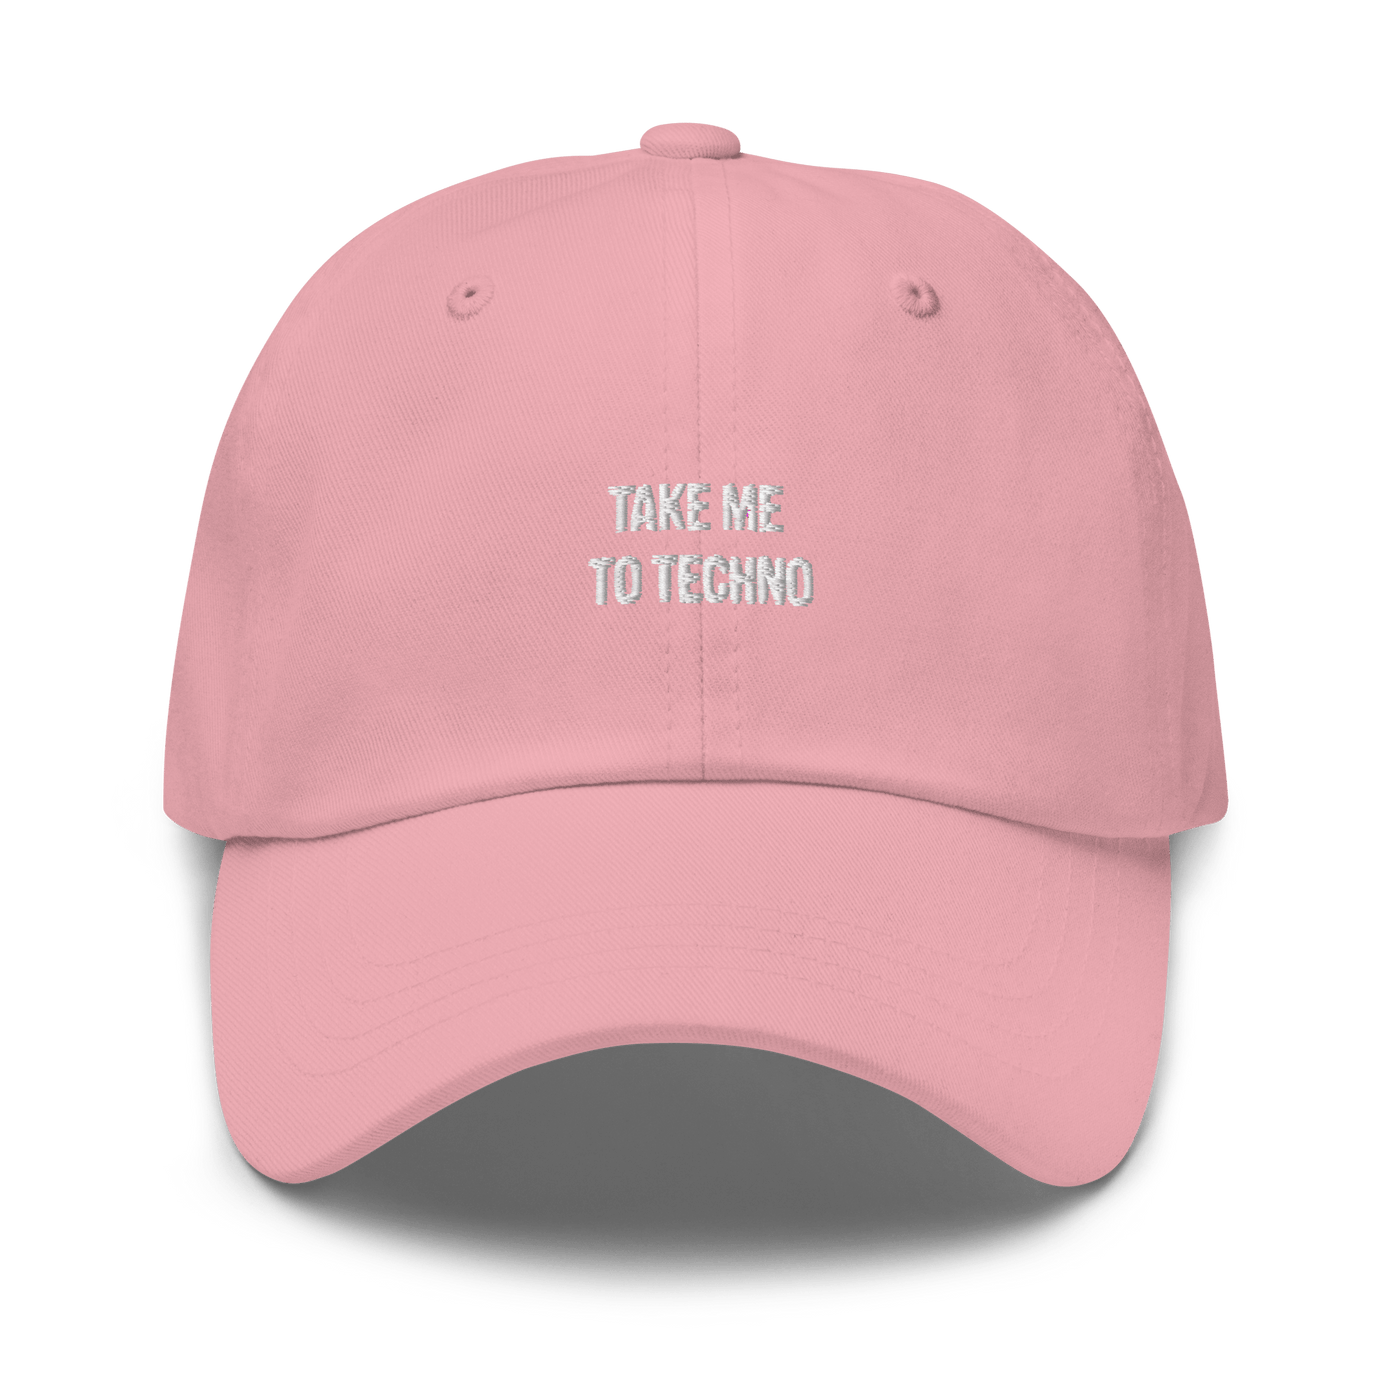 Take me to techno Dad Hat - Stone - - Just Another Cap Store